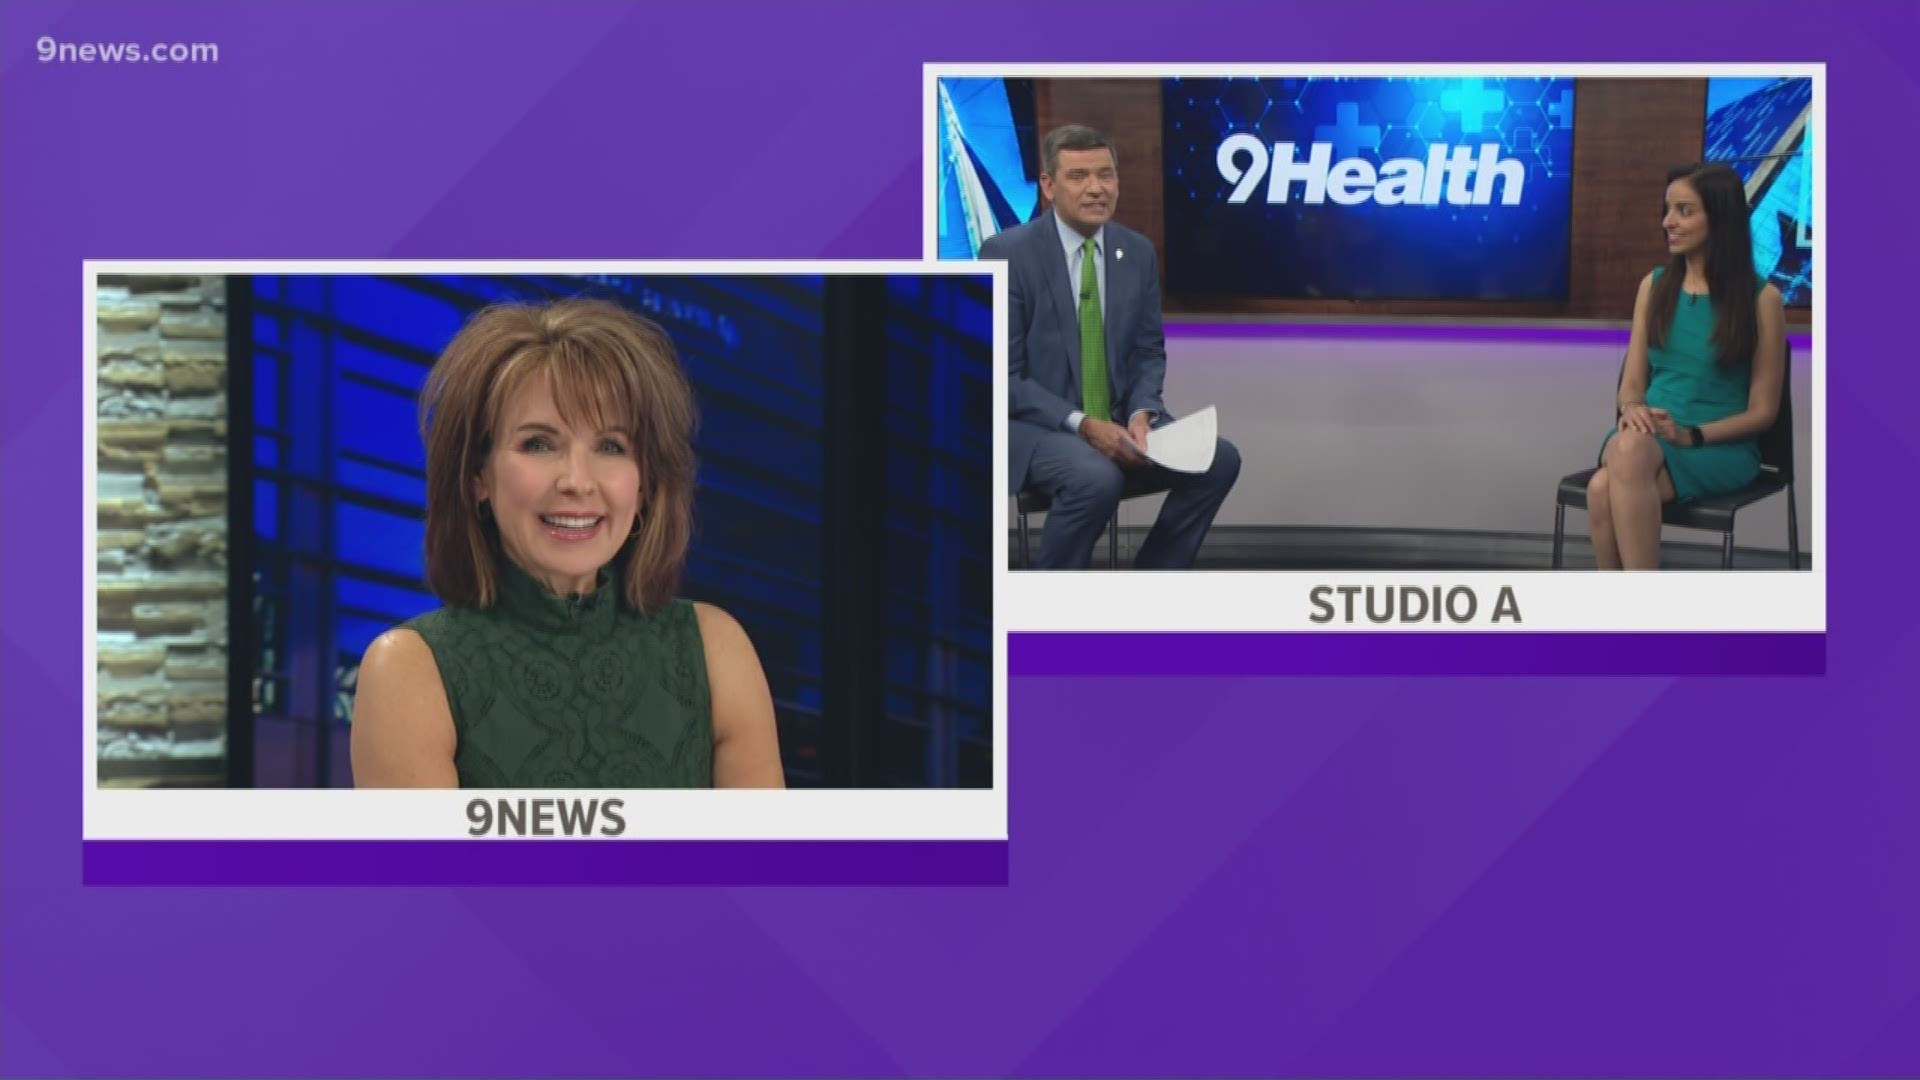 9Health Expert Dr. Payal Kohli is sharing some of her advice for staying health during a self-quarantine.